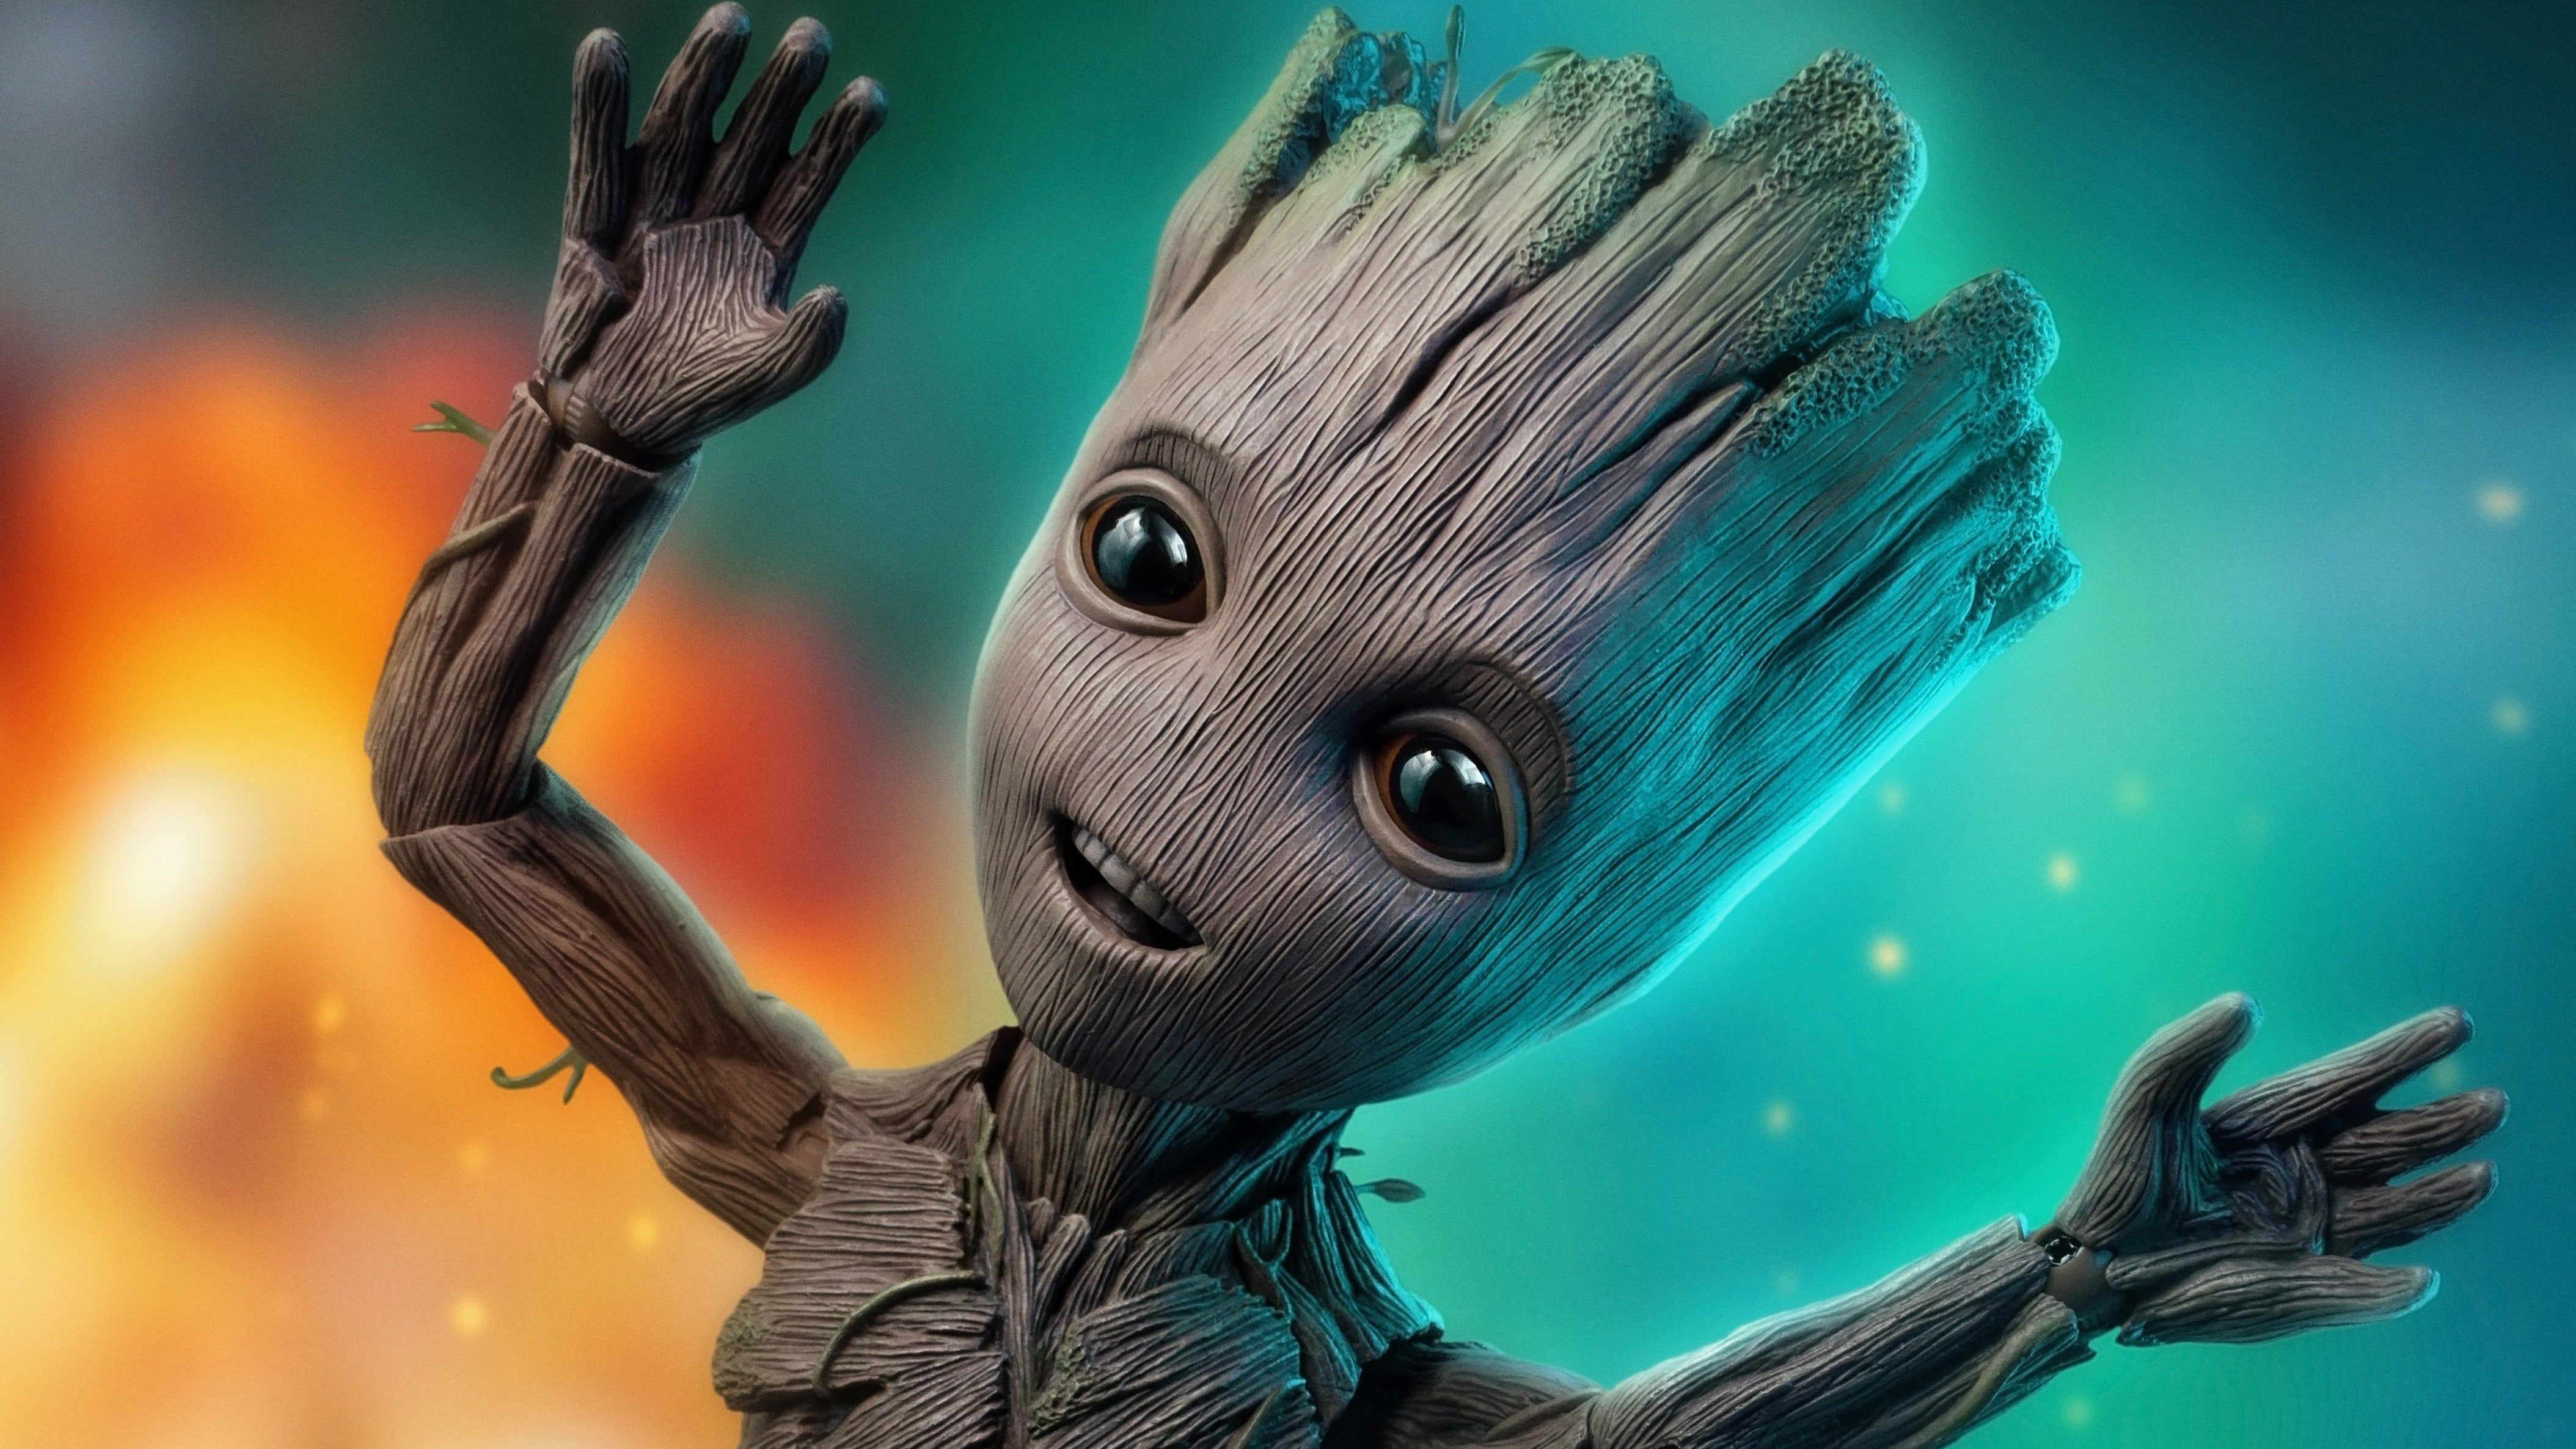 Groot 4K wallpaper for your desktop or mobile screen free and easy to download